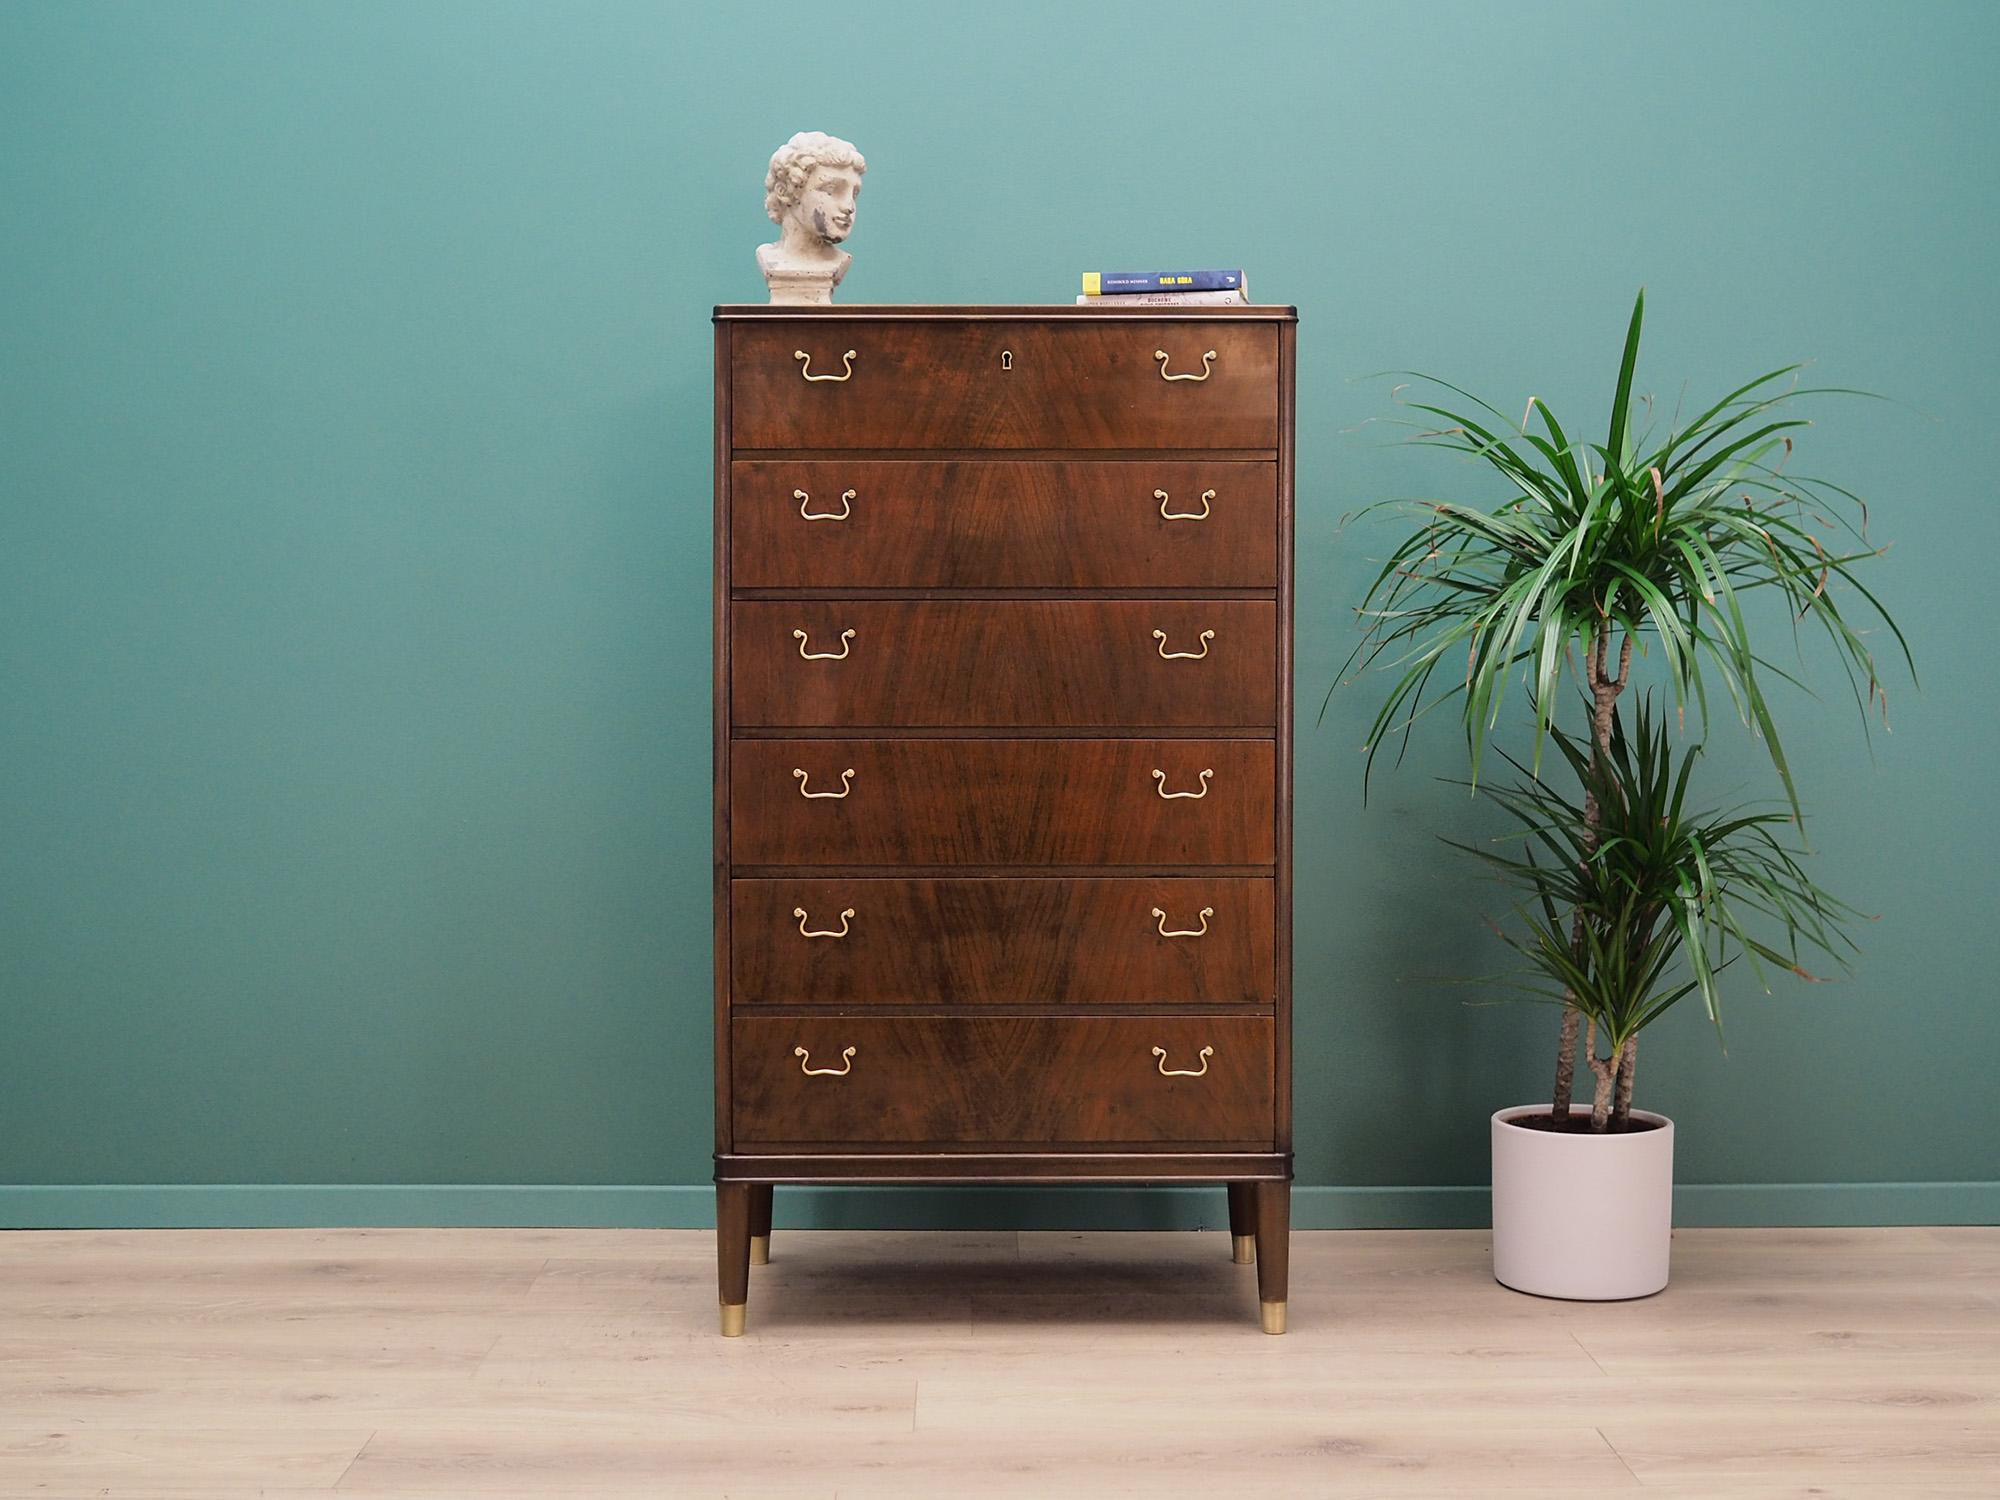 Superb chest of drawers from the 1960s-1970s. Danish design, Minimalist form. Surface of the furniture covered with walnut veneer, legs made of solid walnut wood. Chest of drawers has six spacious drawers, no key included. Preserved in good